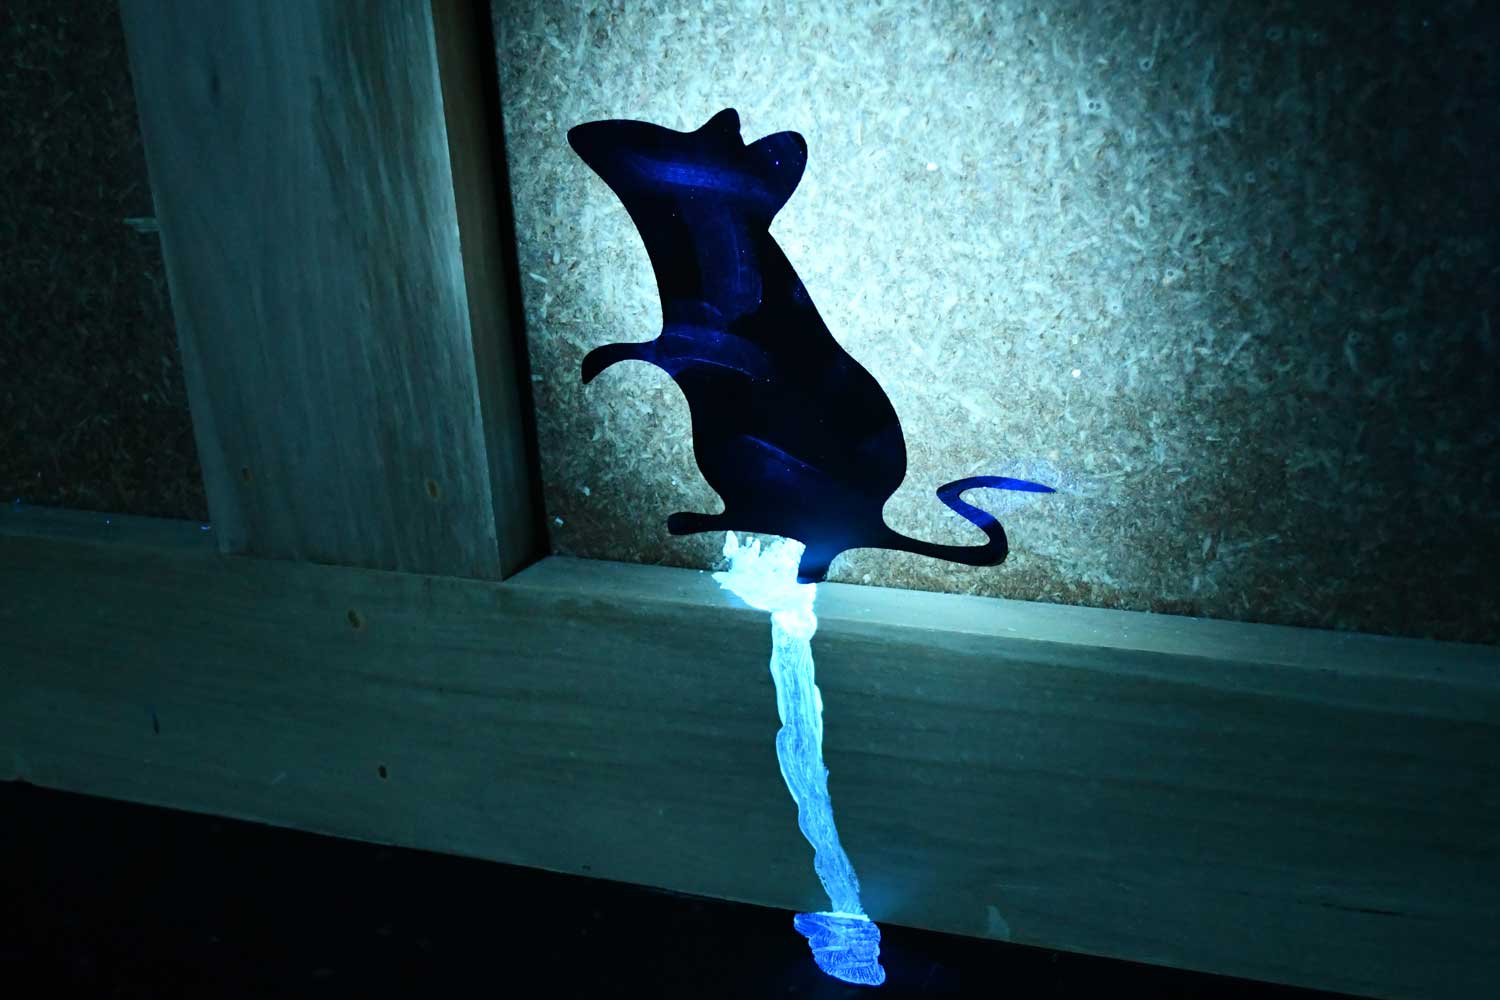 Mouse on display in UV light.